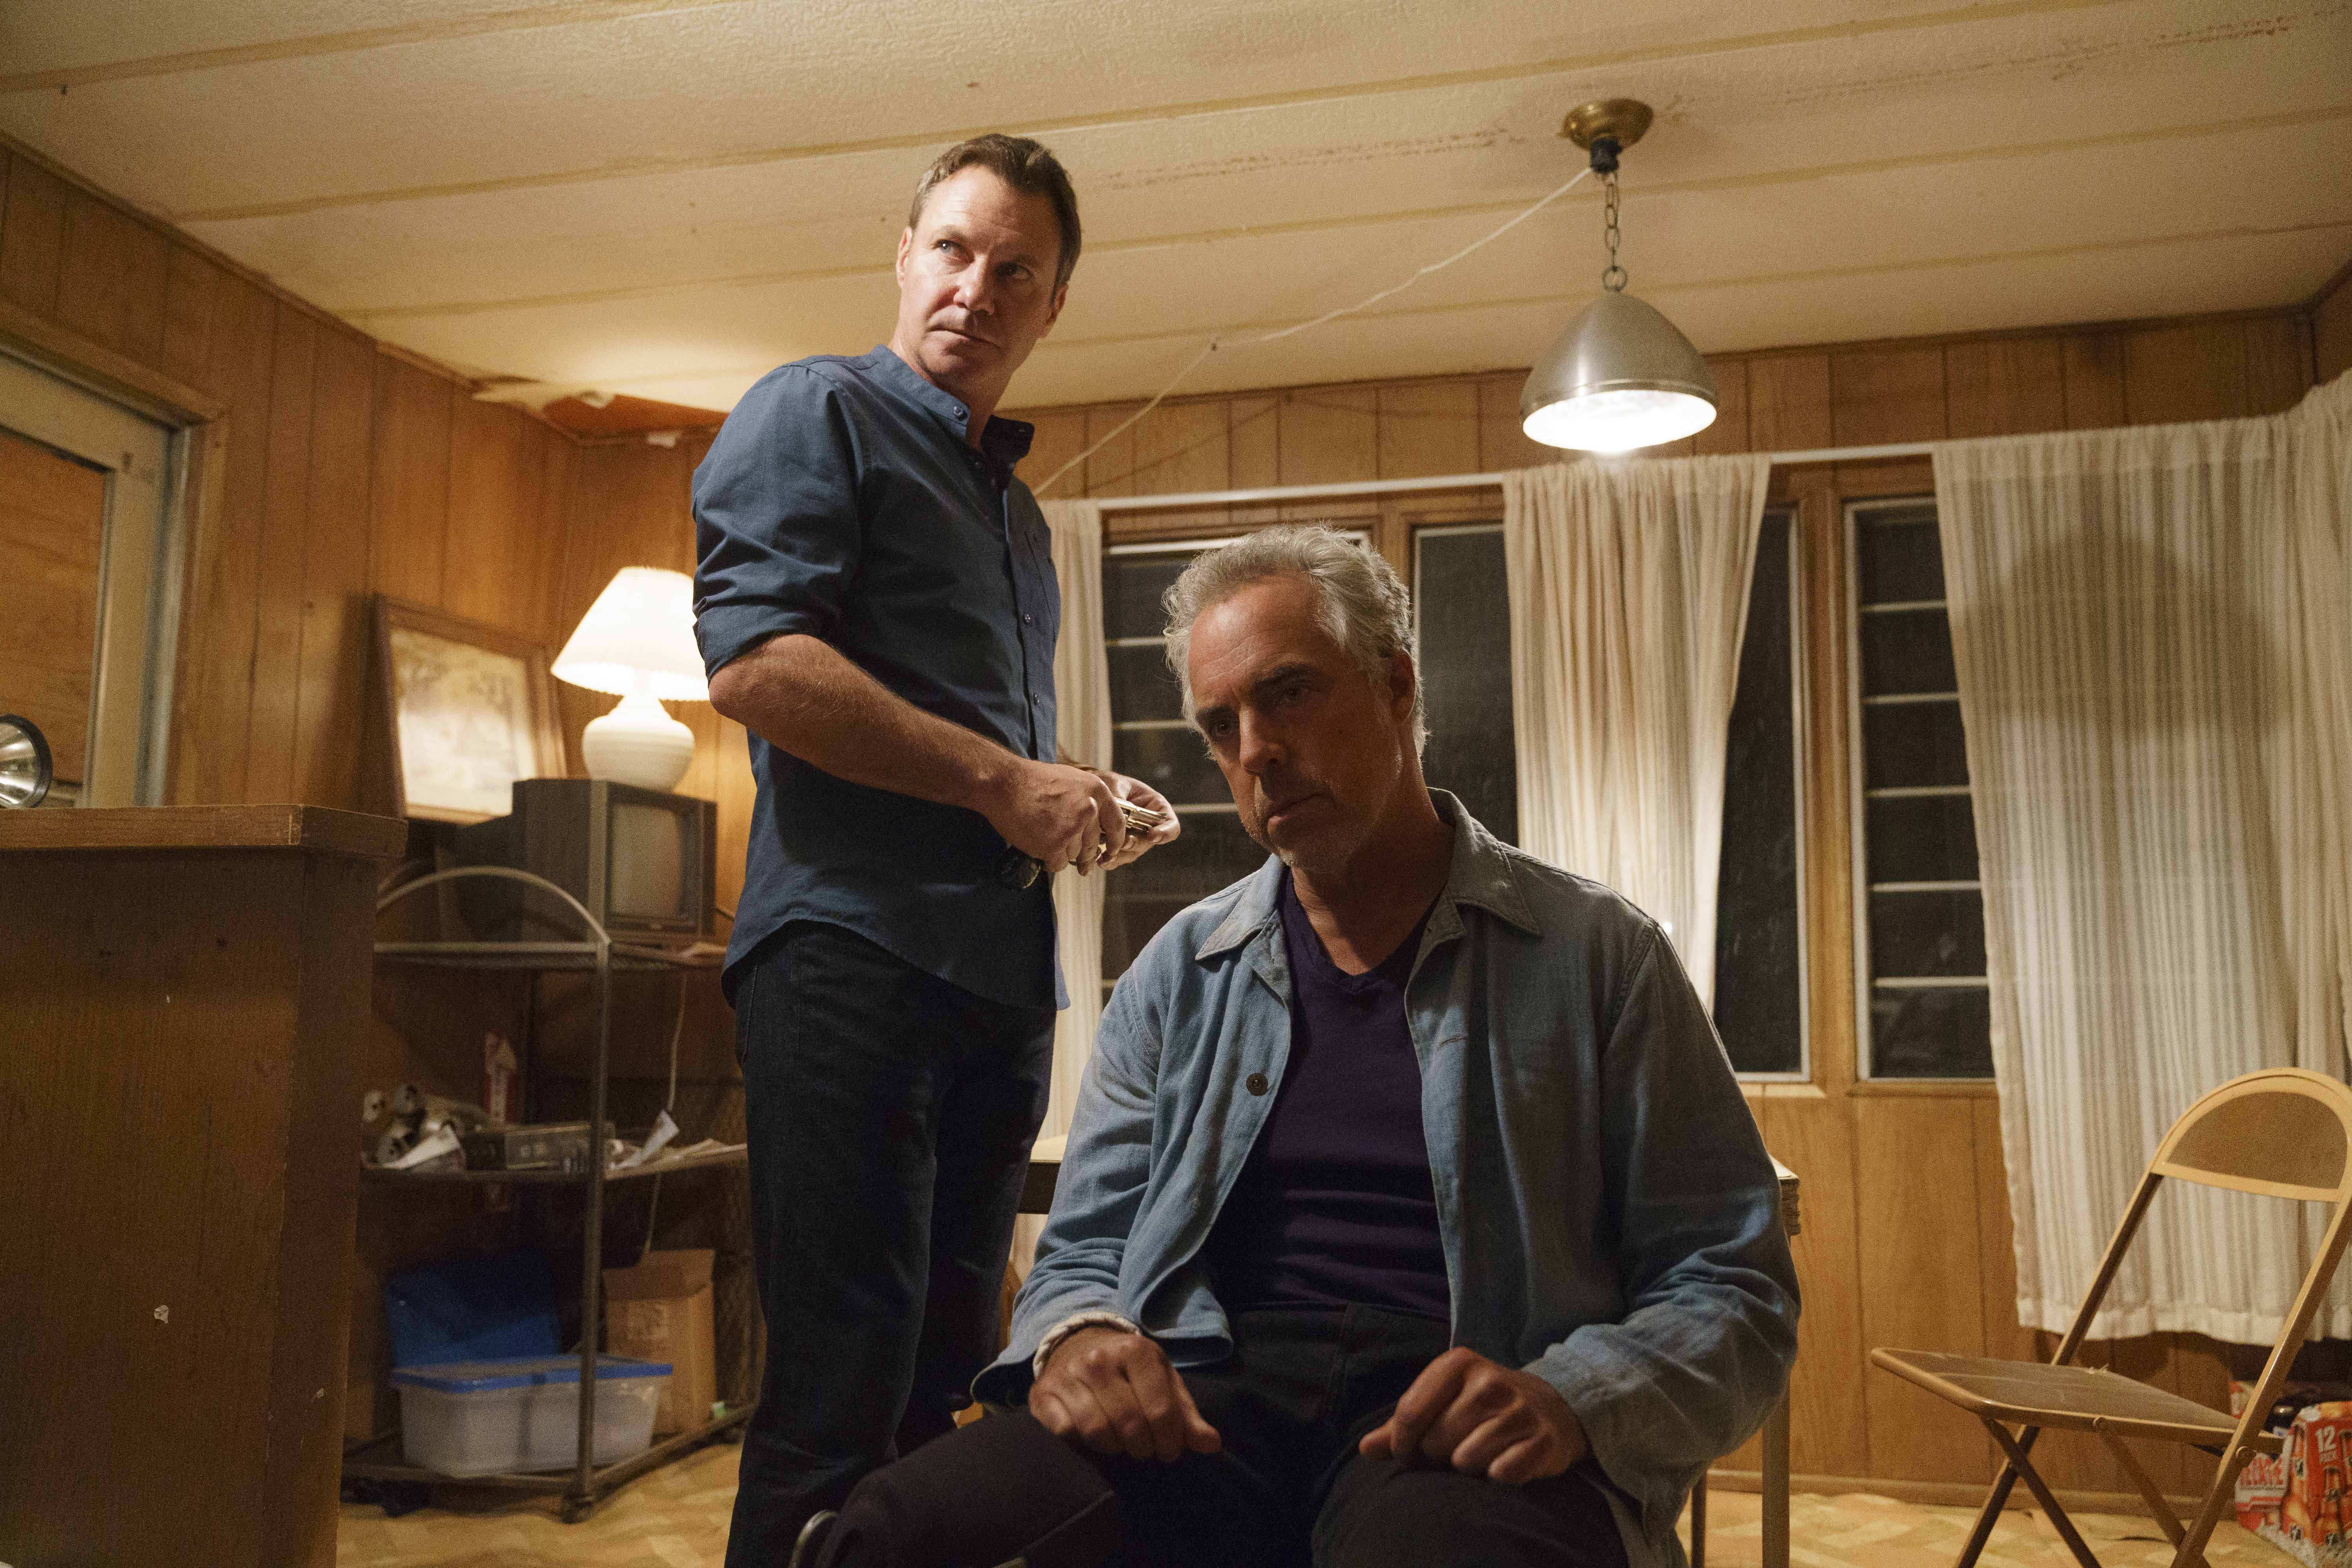 ART OF THE CUT with the editors of Amazon Studios' "Bosch" 24